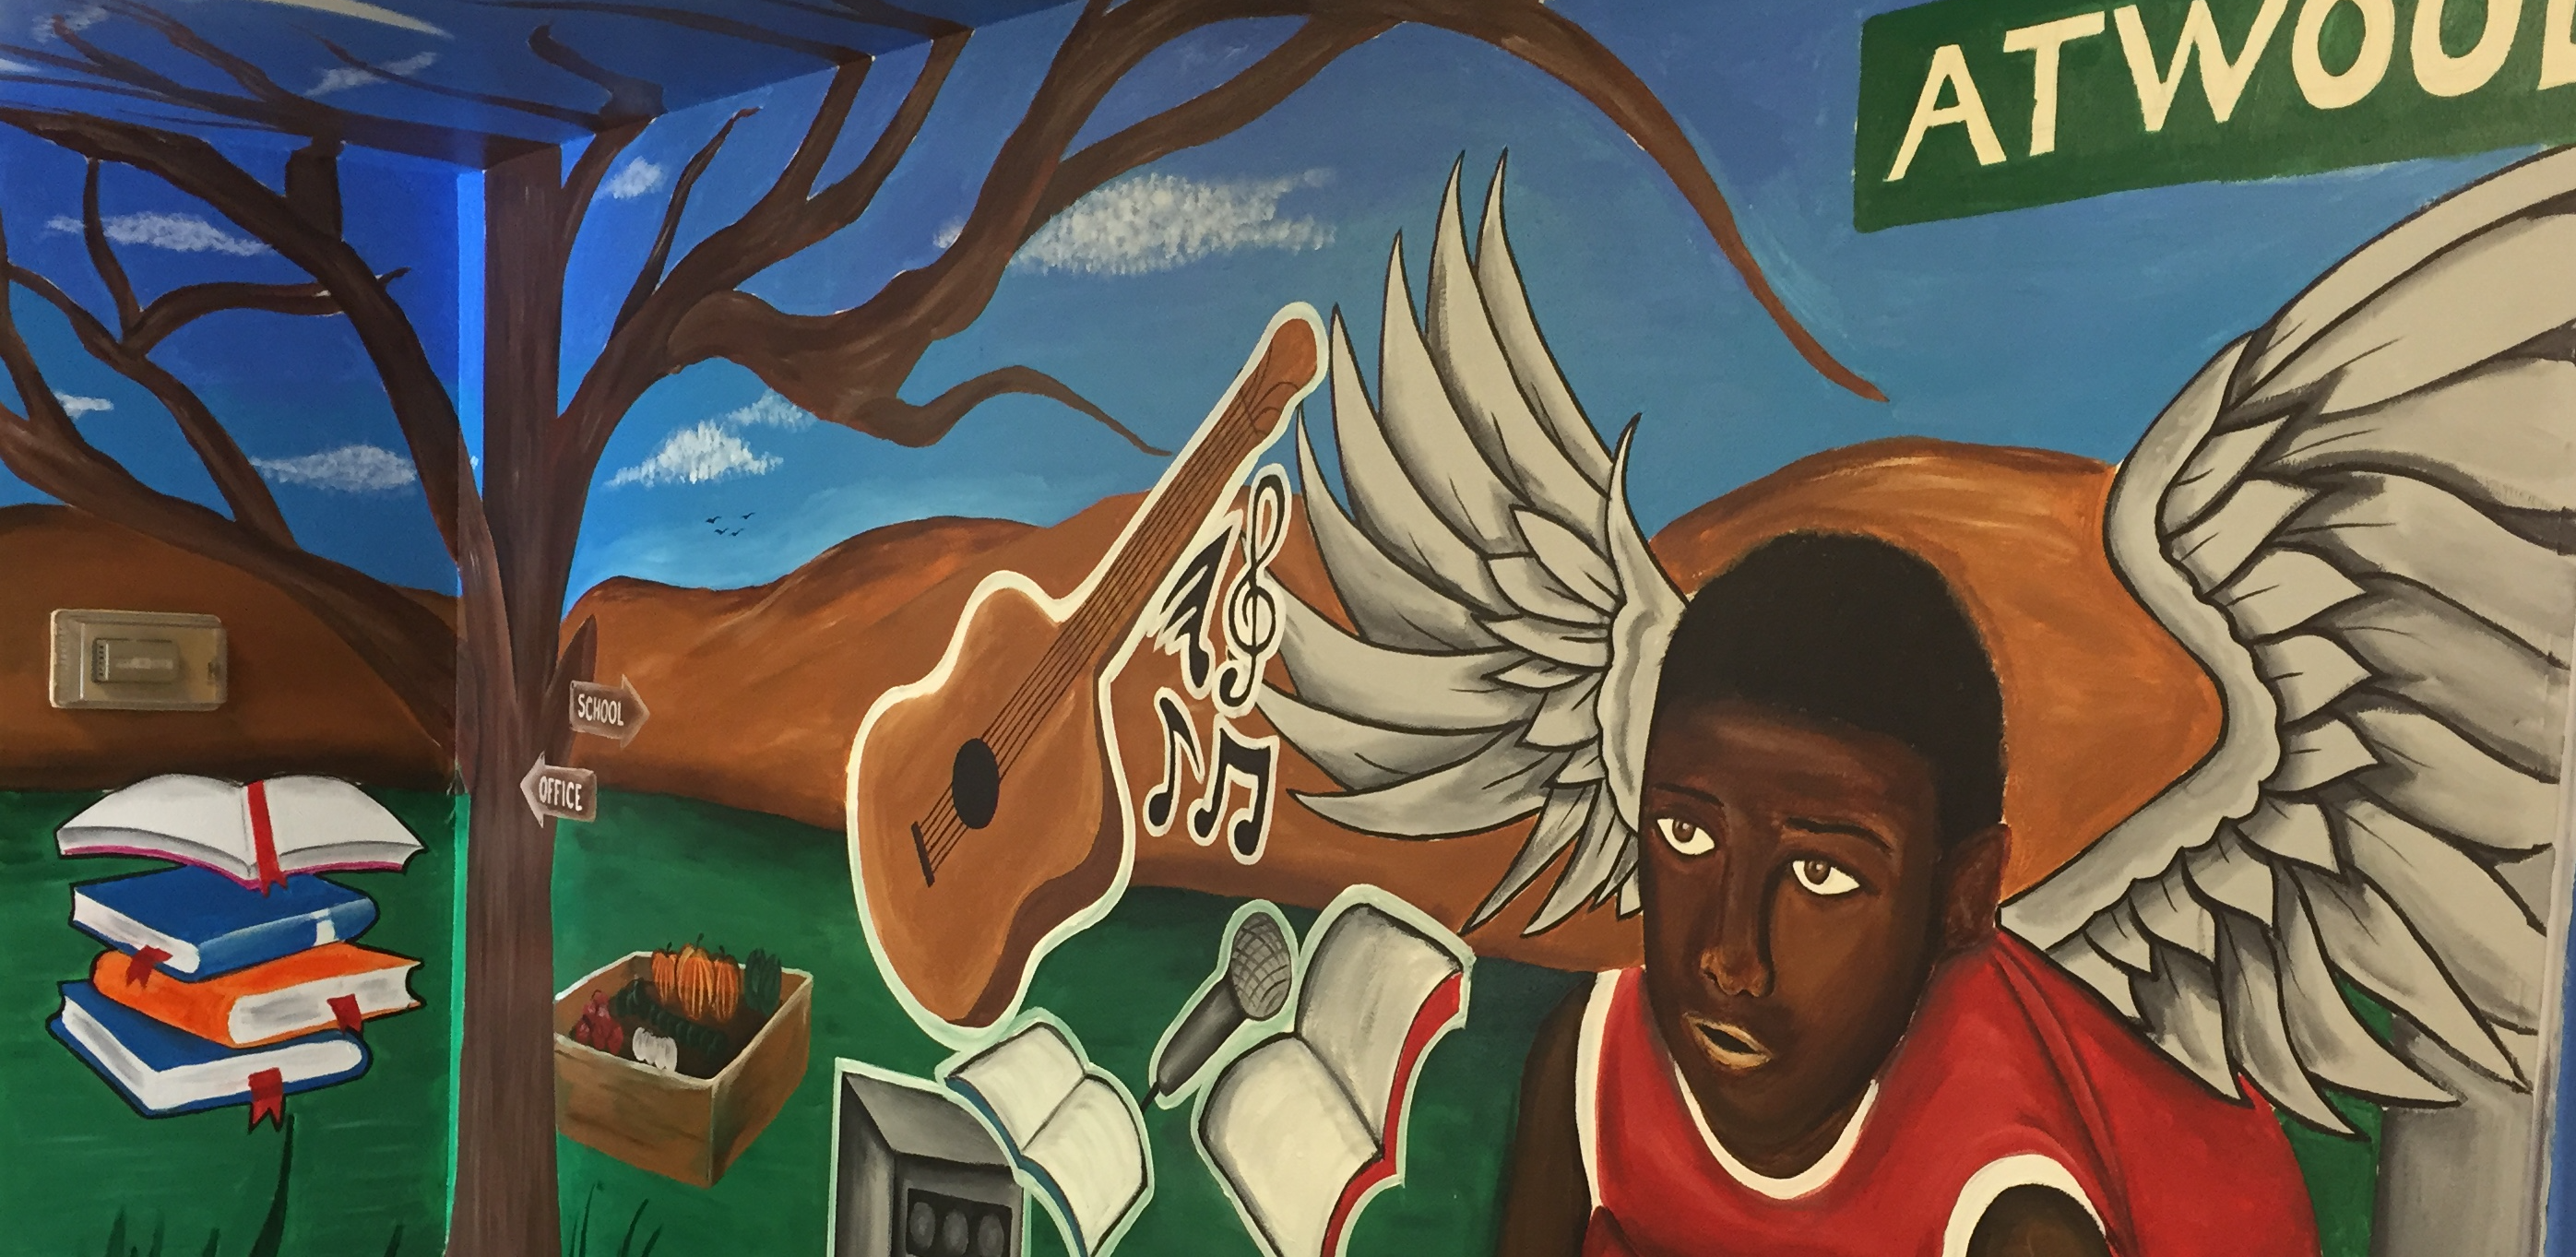 Madison Public Library's Bubbler Making Justice "Welcome" mural residency with Rodrigo Carapia